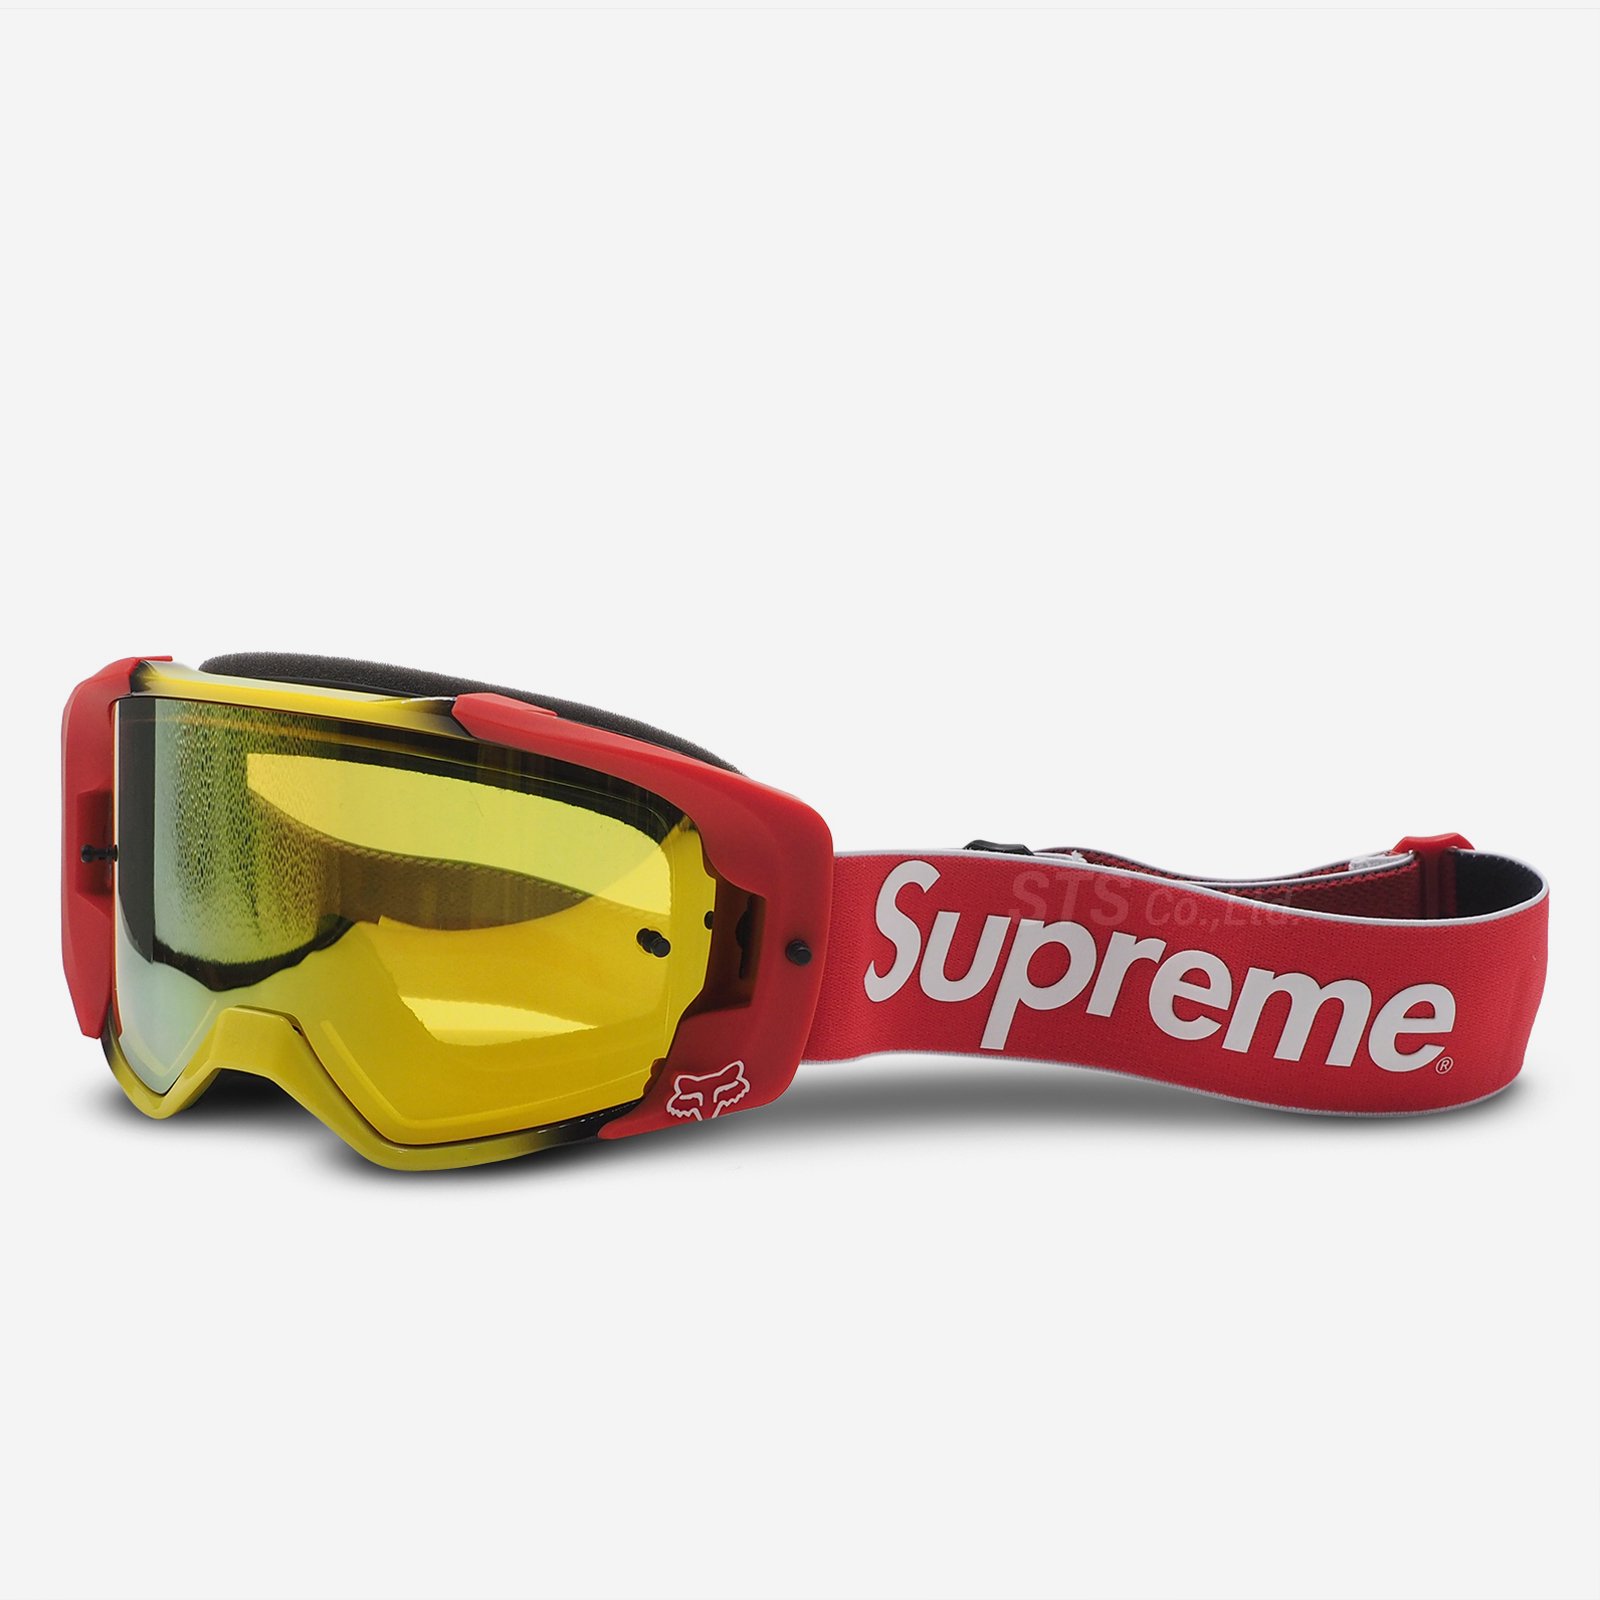 Supreme®/Fox Racing® VUE® Gogglesその他